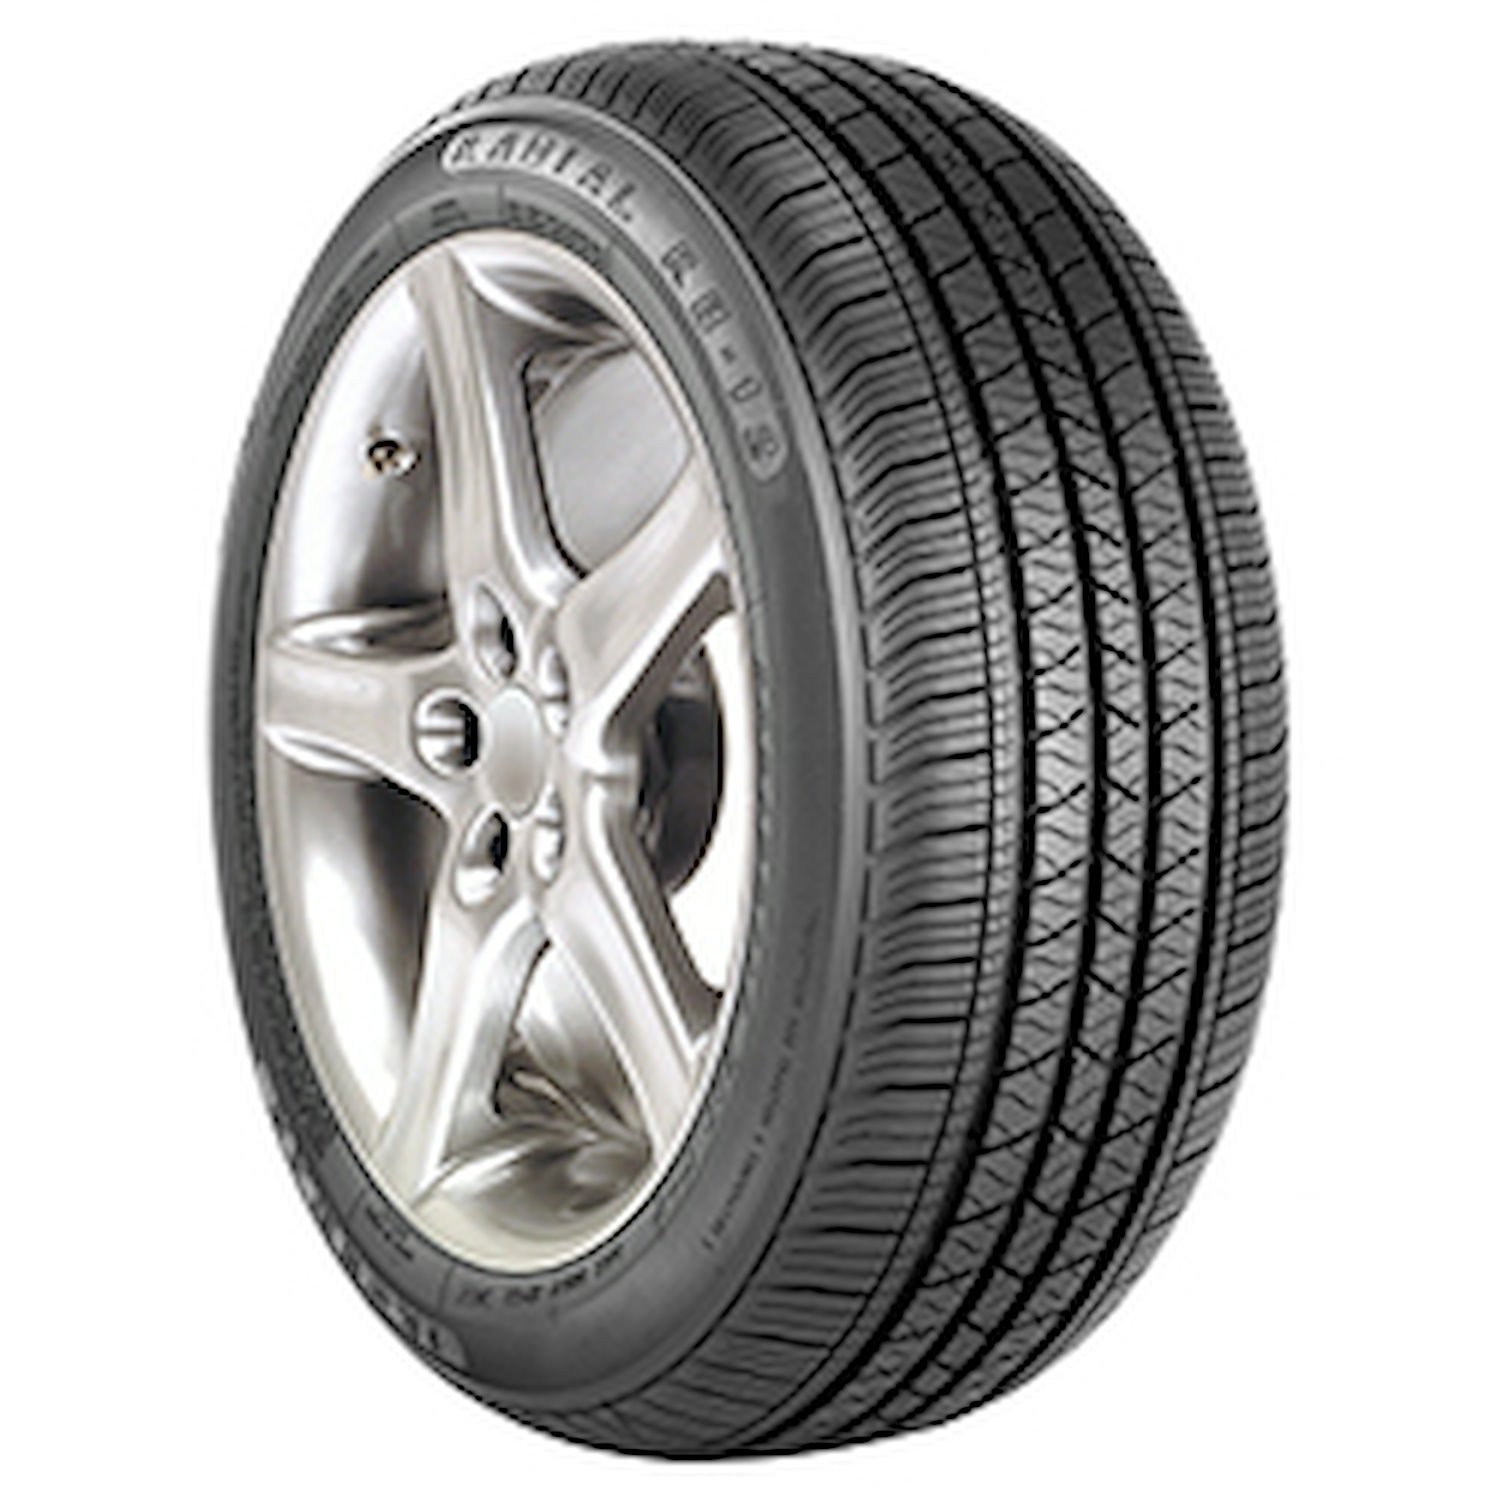 RB-12 Tire, 195/60R15 88T